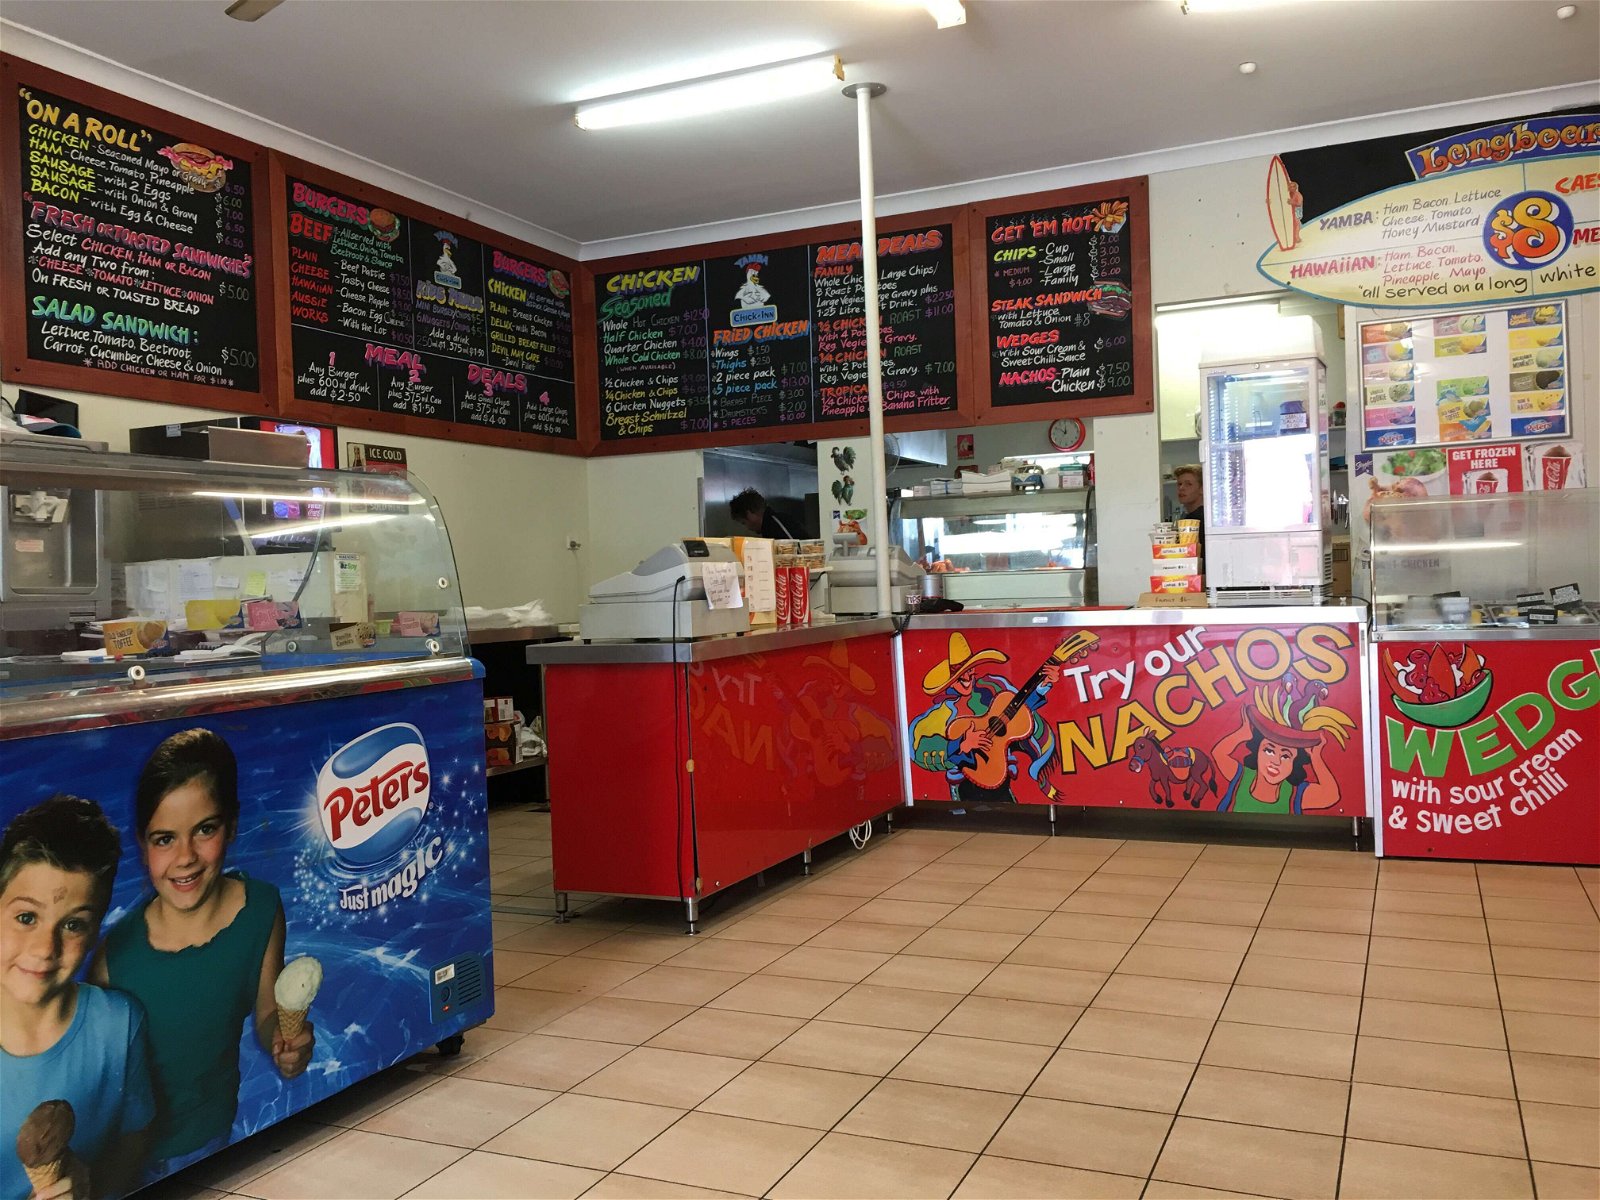 Chick Inn Yamba - Food Delivery Shop